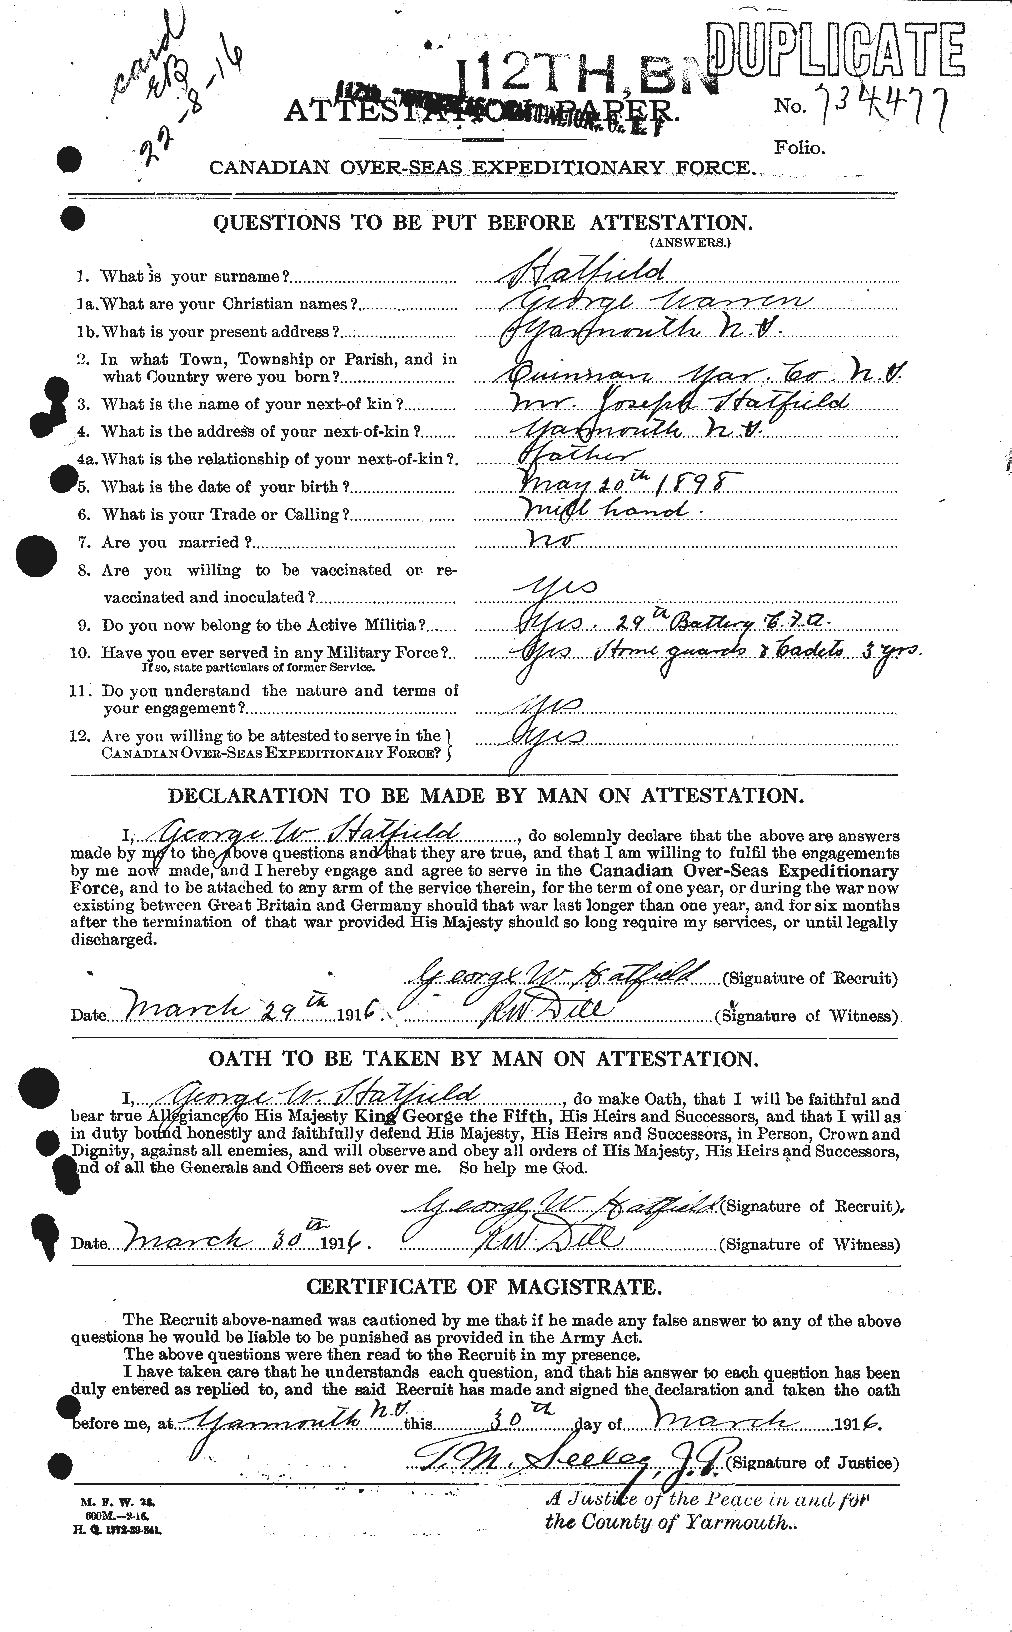 Personnel Records of the First World War - CEF 388799a